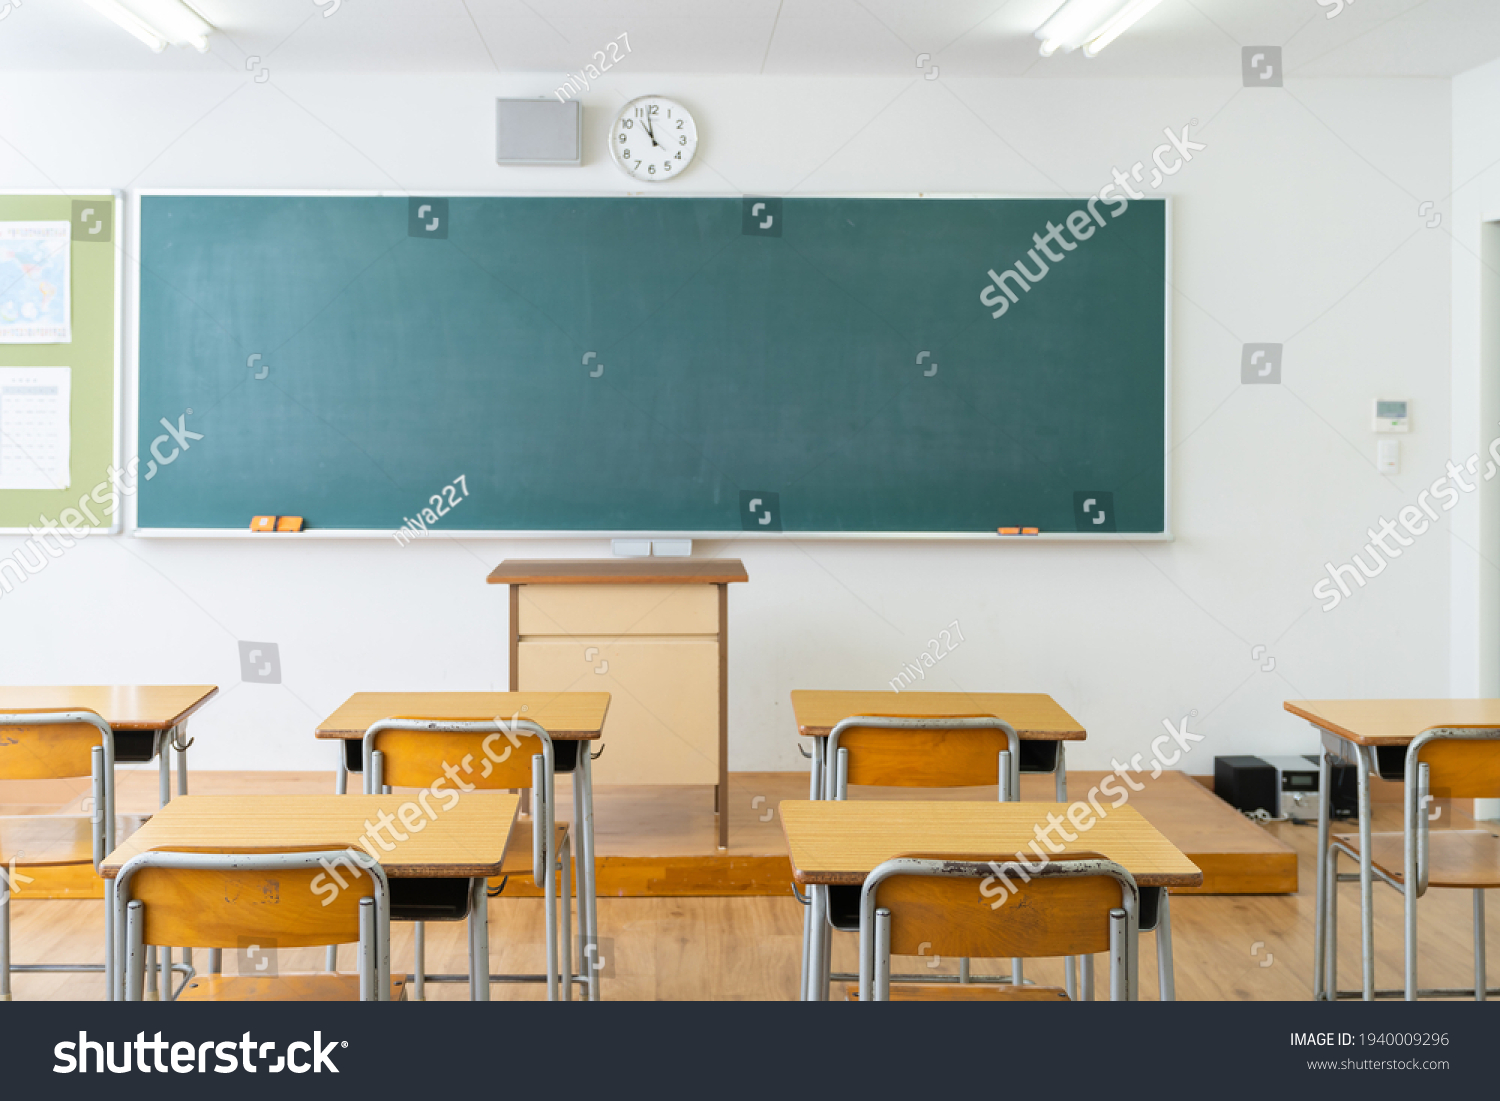 Classroom of the school without student and teacher #1940009296